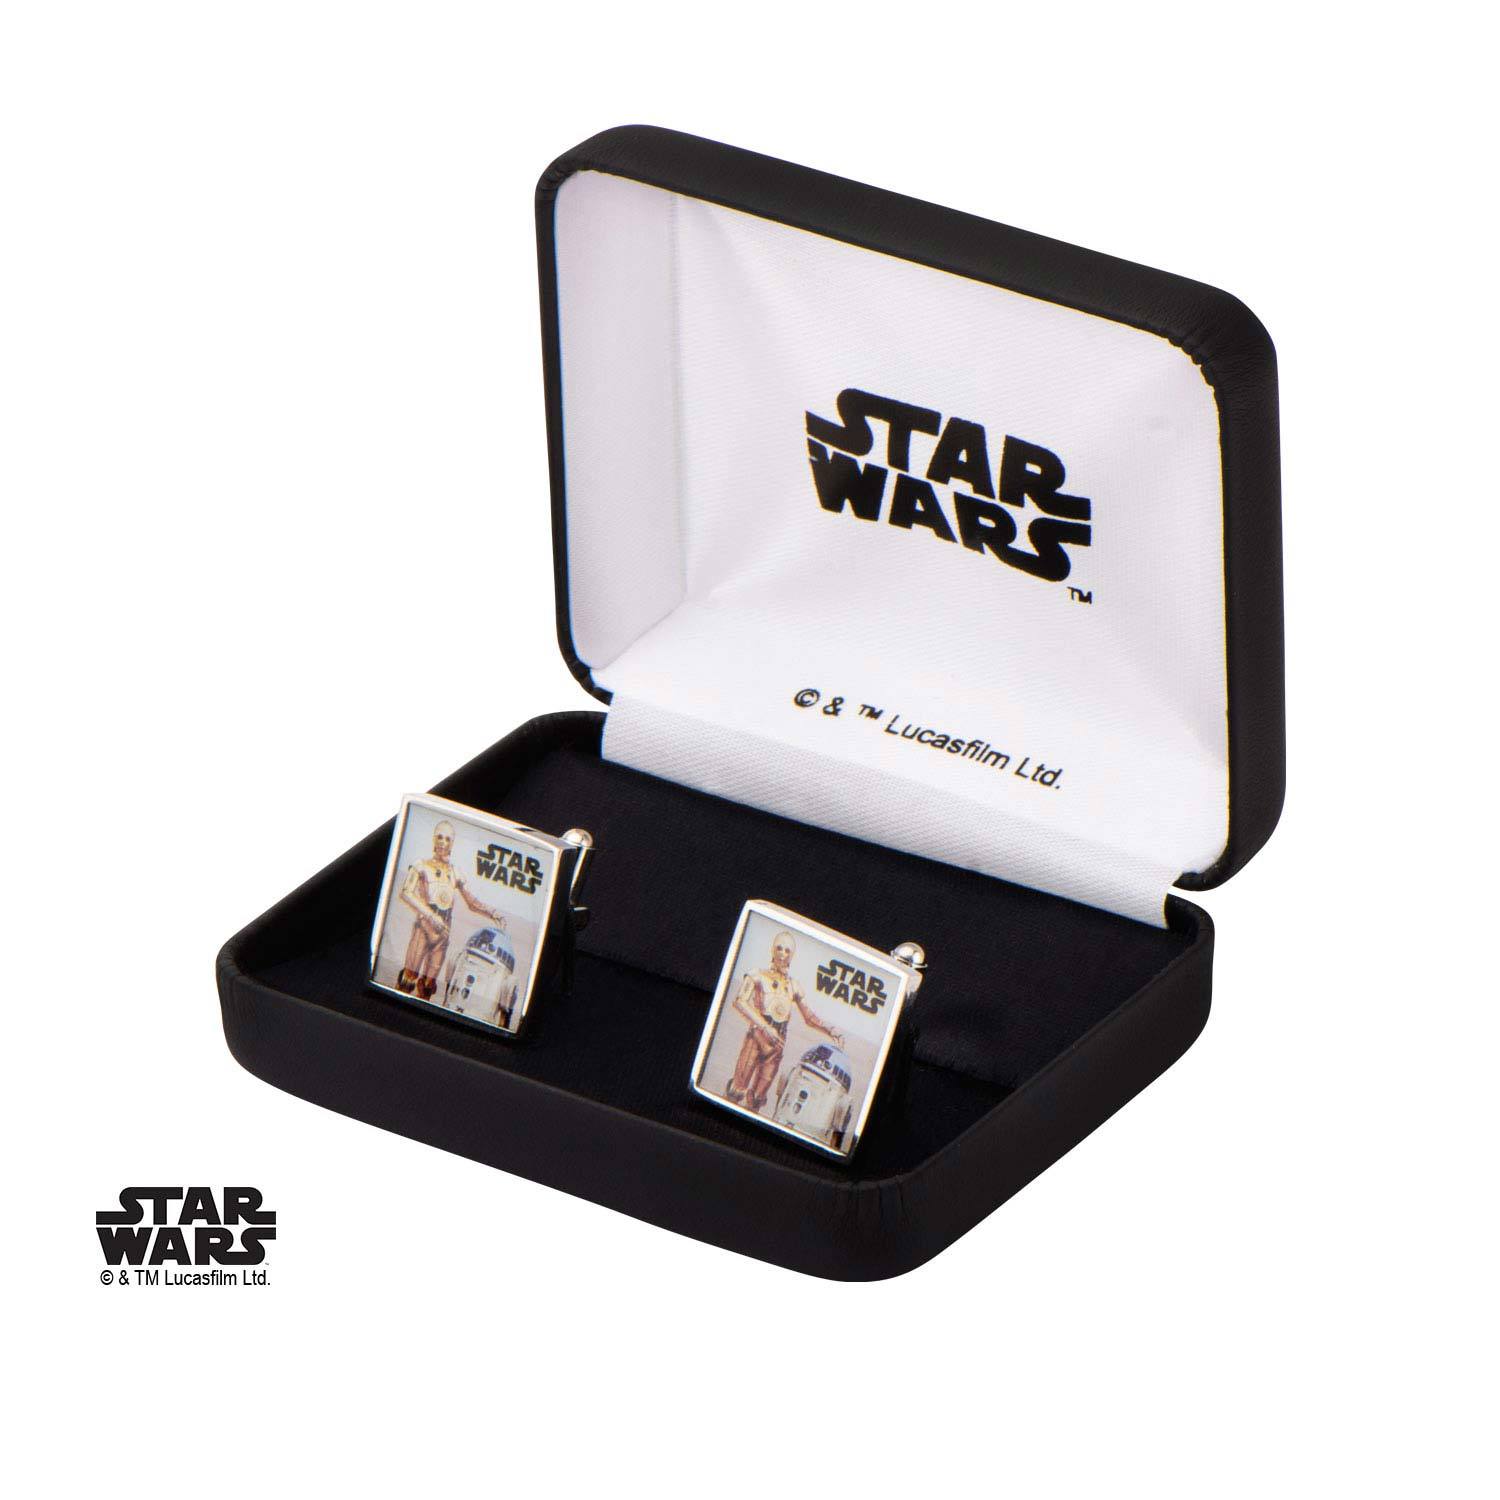 Star Wars R2-D2 and C-3PO Printed Square Cufflinks